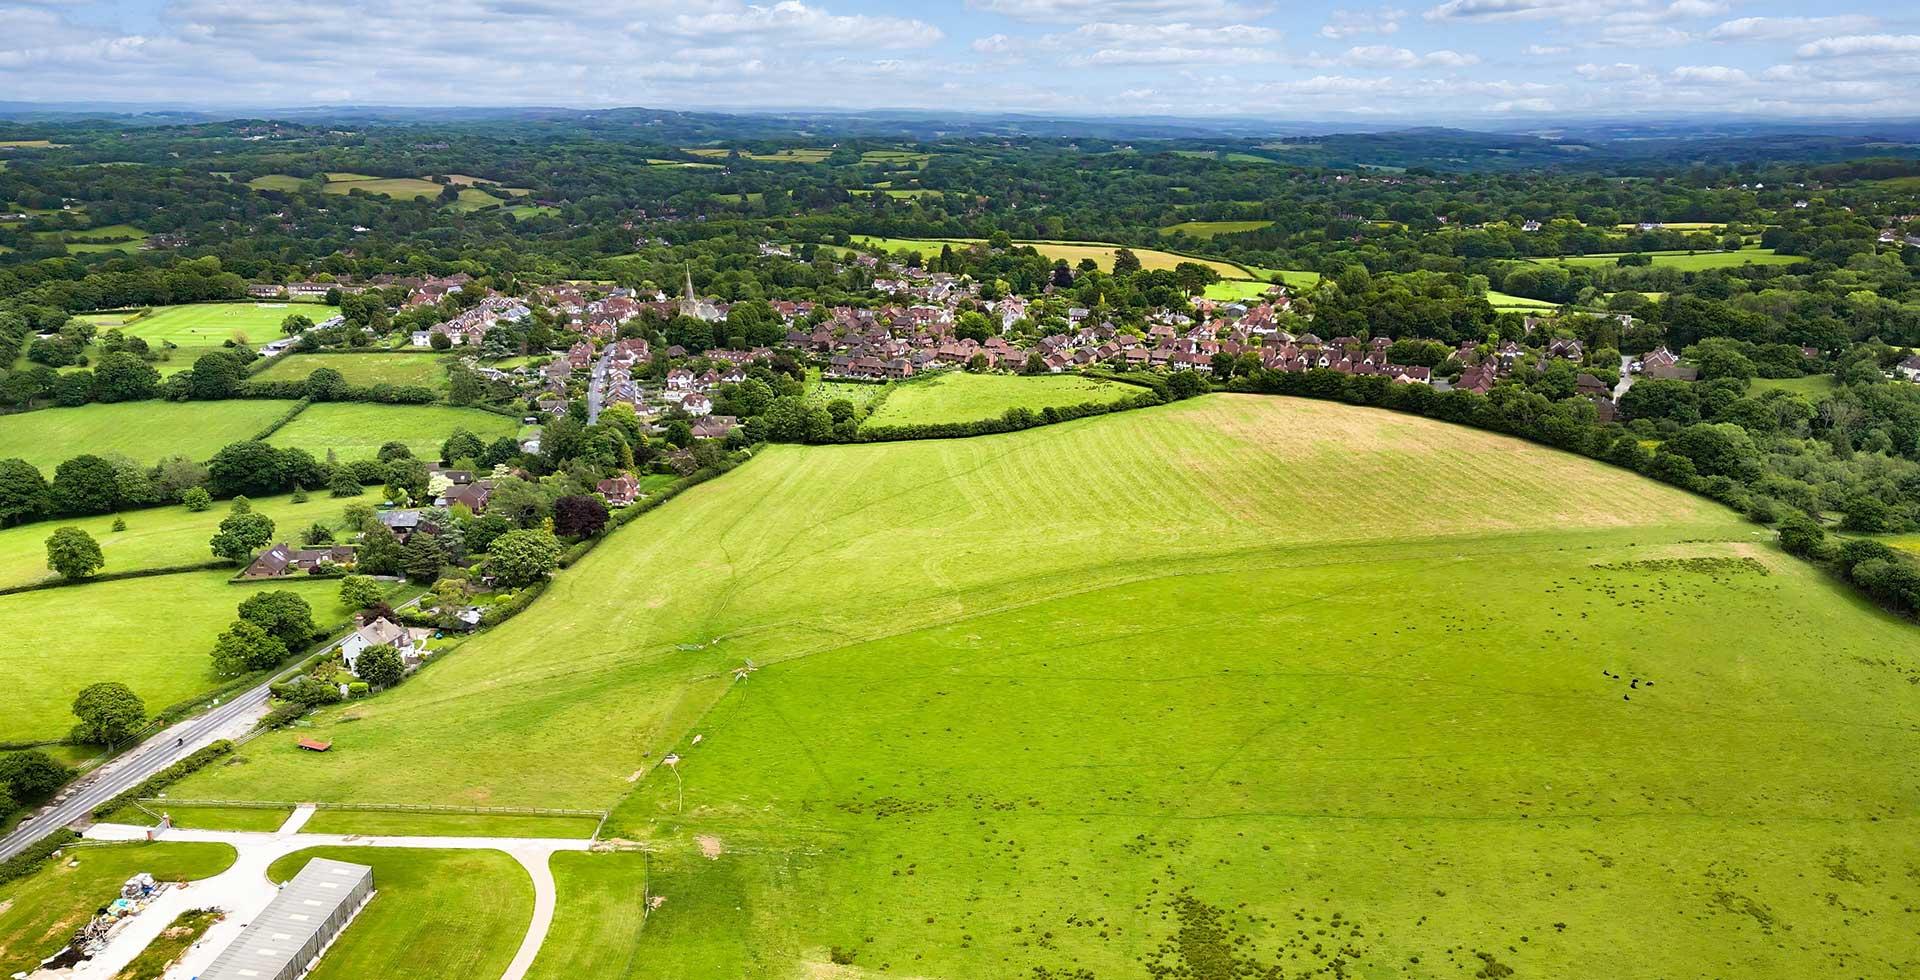 Drone image of Rotherfield